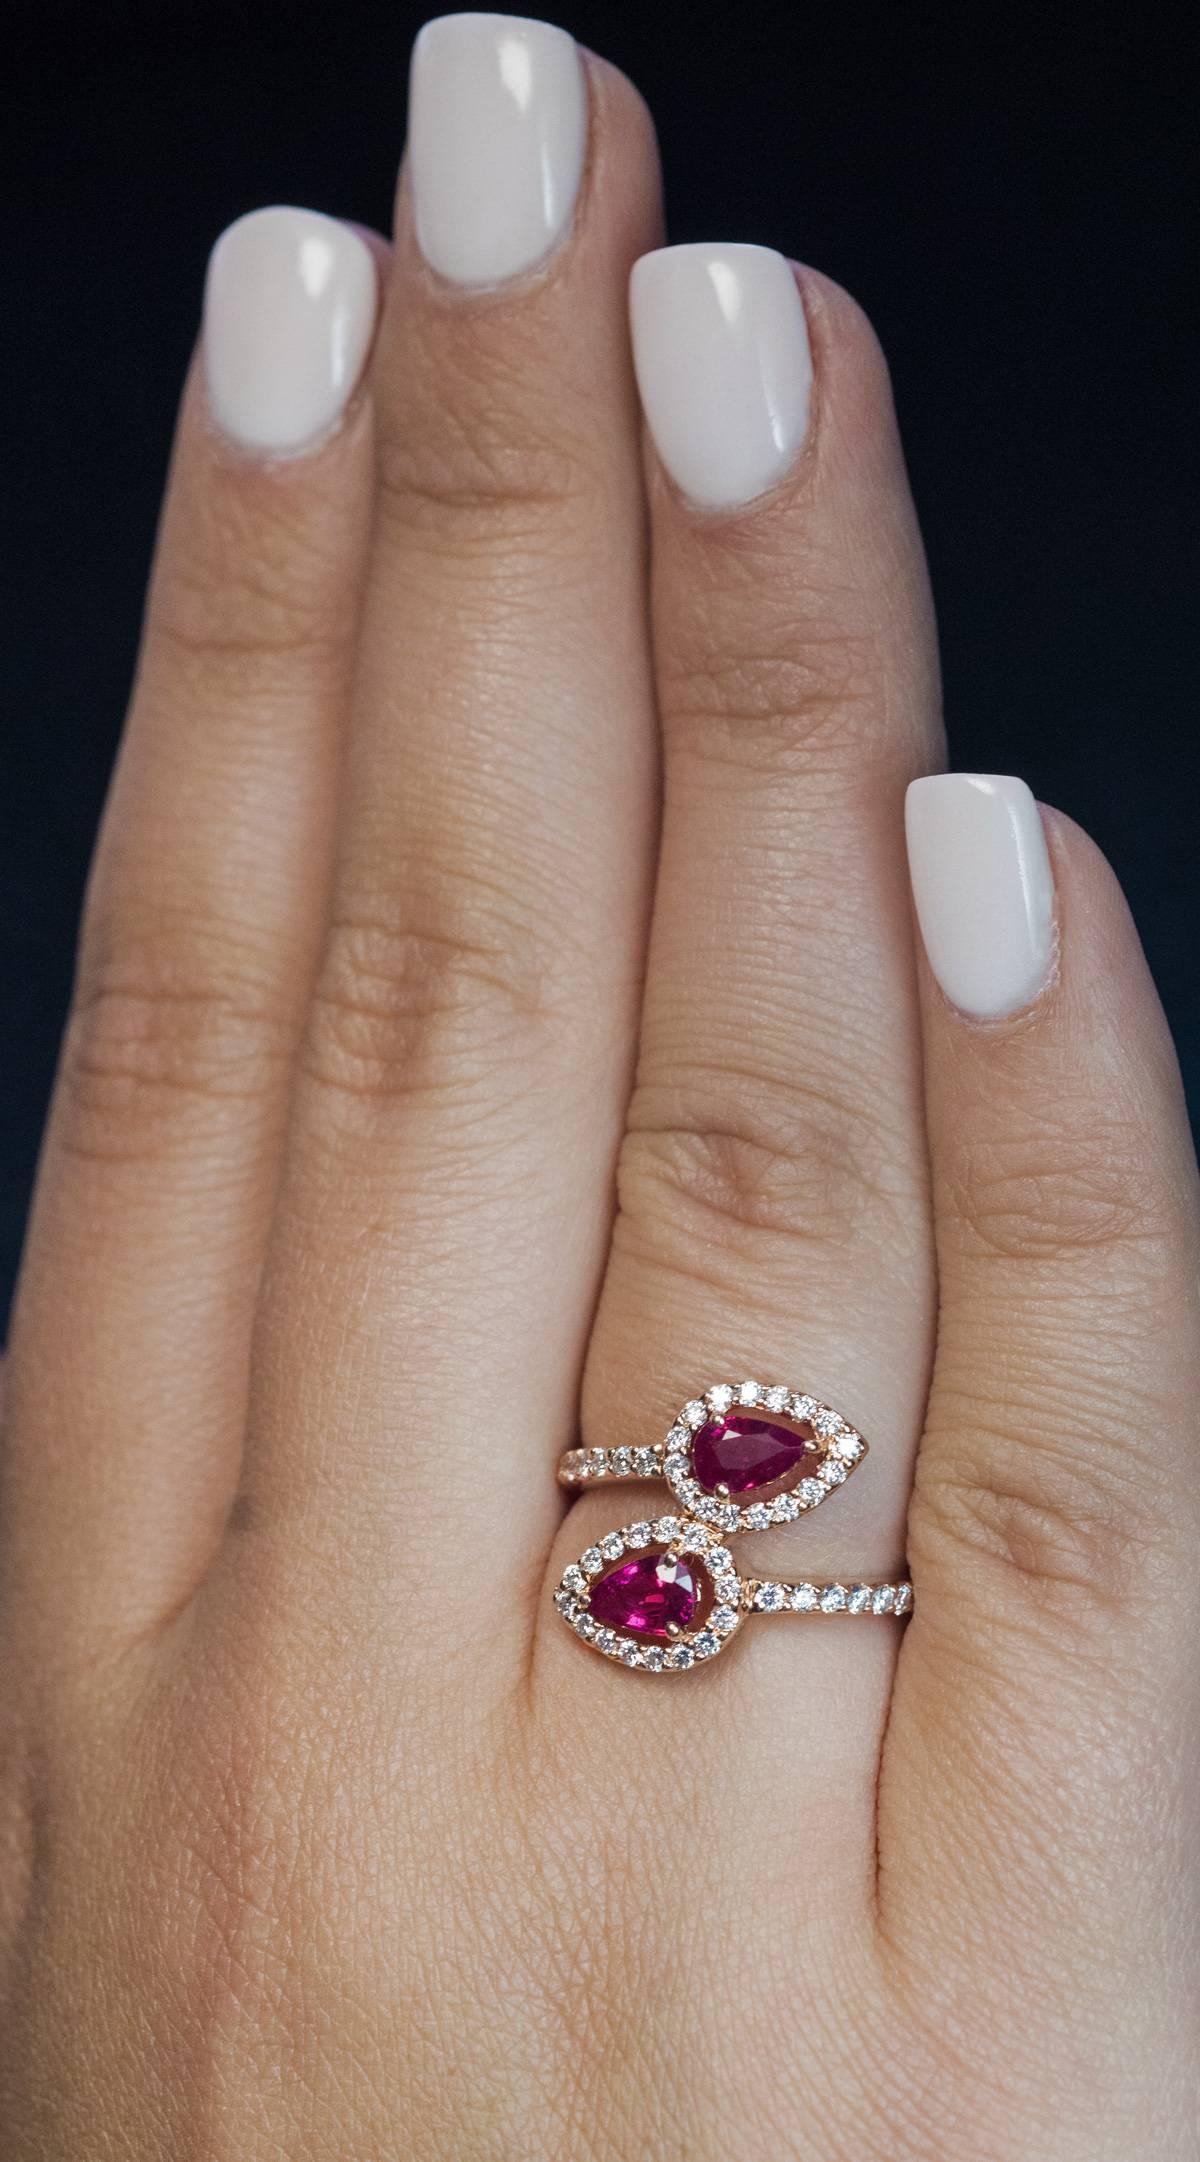 A modern 14K Russian rose gold bypass ring is set with two pear cut natural rubies and 46 sparkling bright white brilliant cut diamonds.
Total ruby weight is 1.18 ct
Total diamond weight is 0.53 ct
Ruby and diamond weight is struck inside the